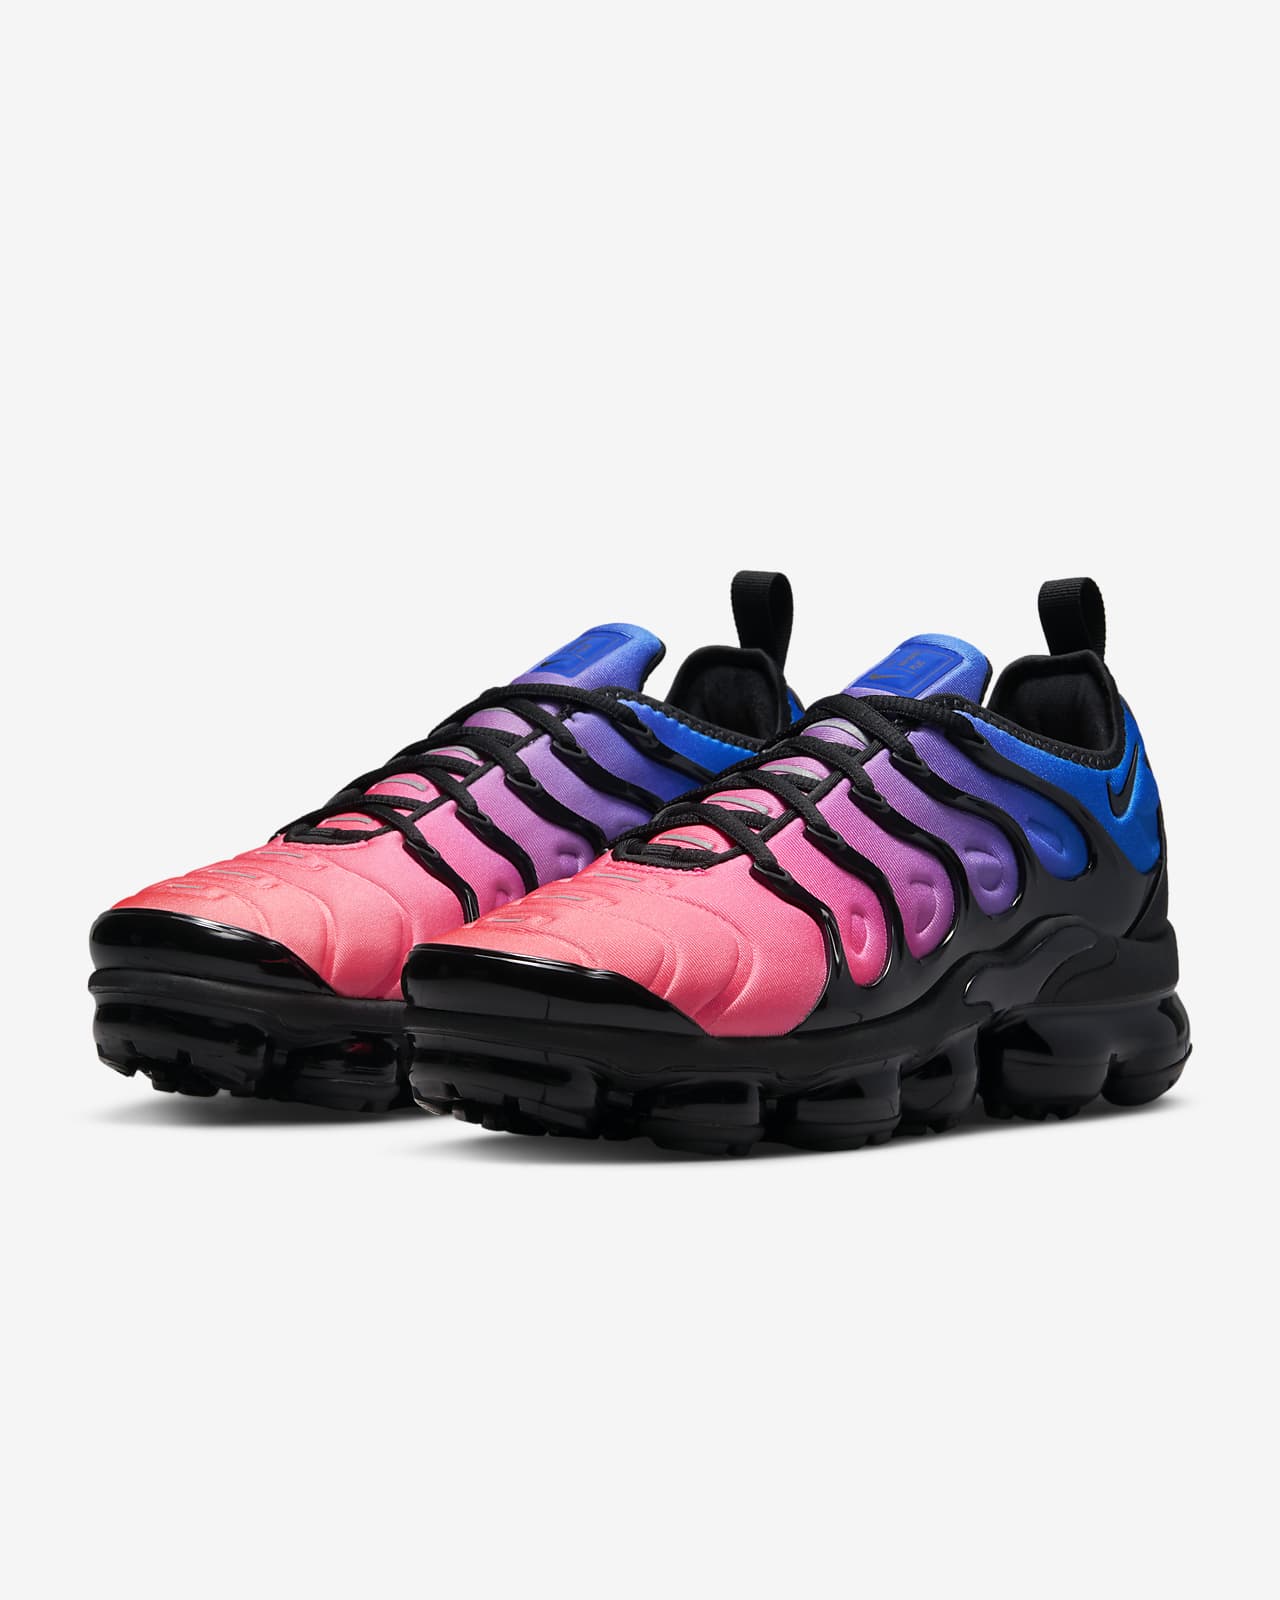 nike vapormax plus limited edition